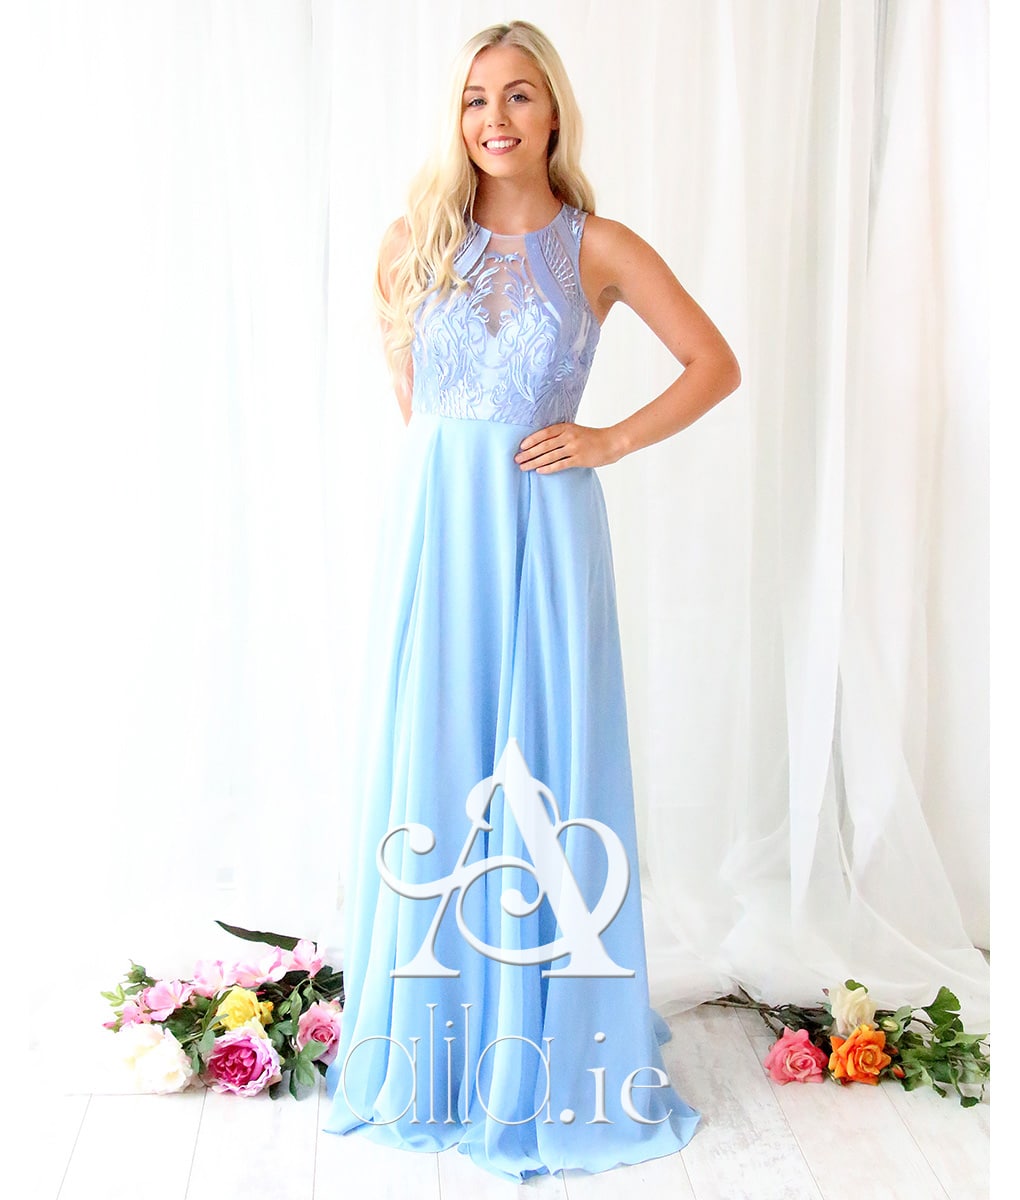 Bariano Pale Blue Gown - Alila